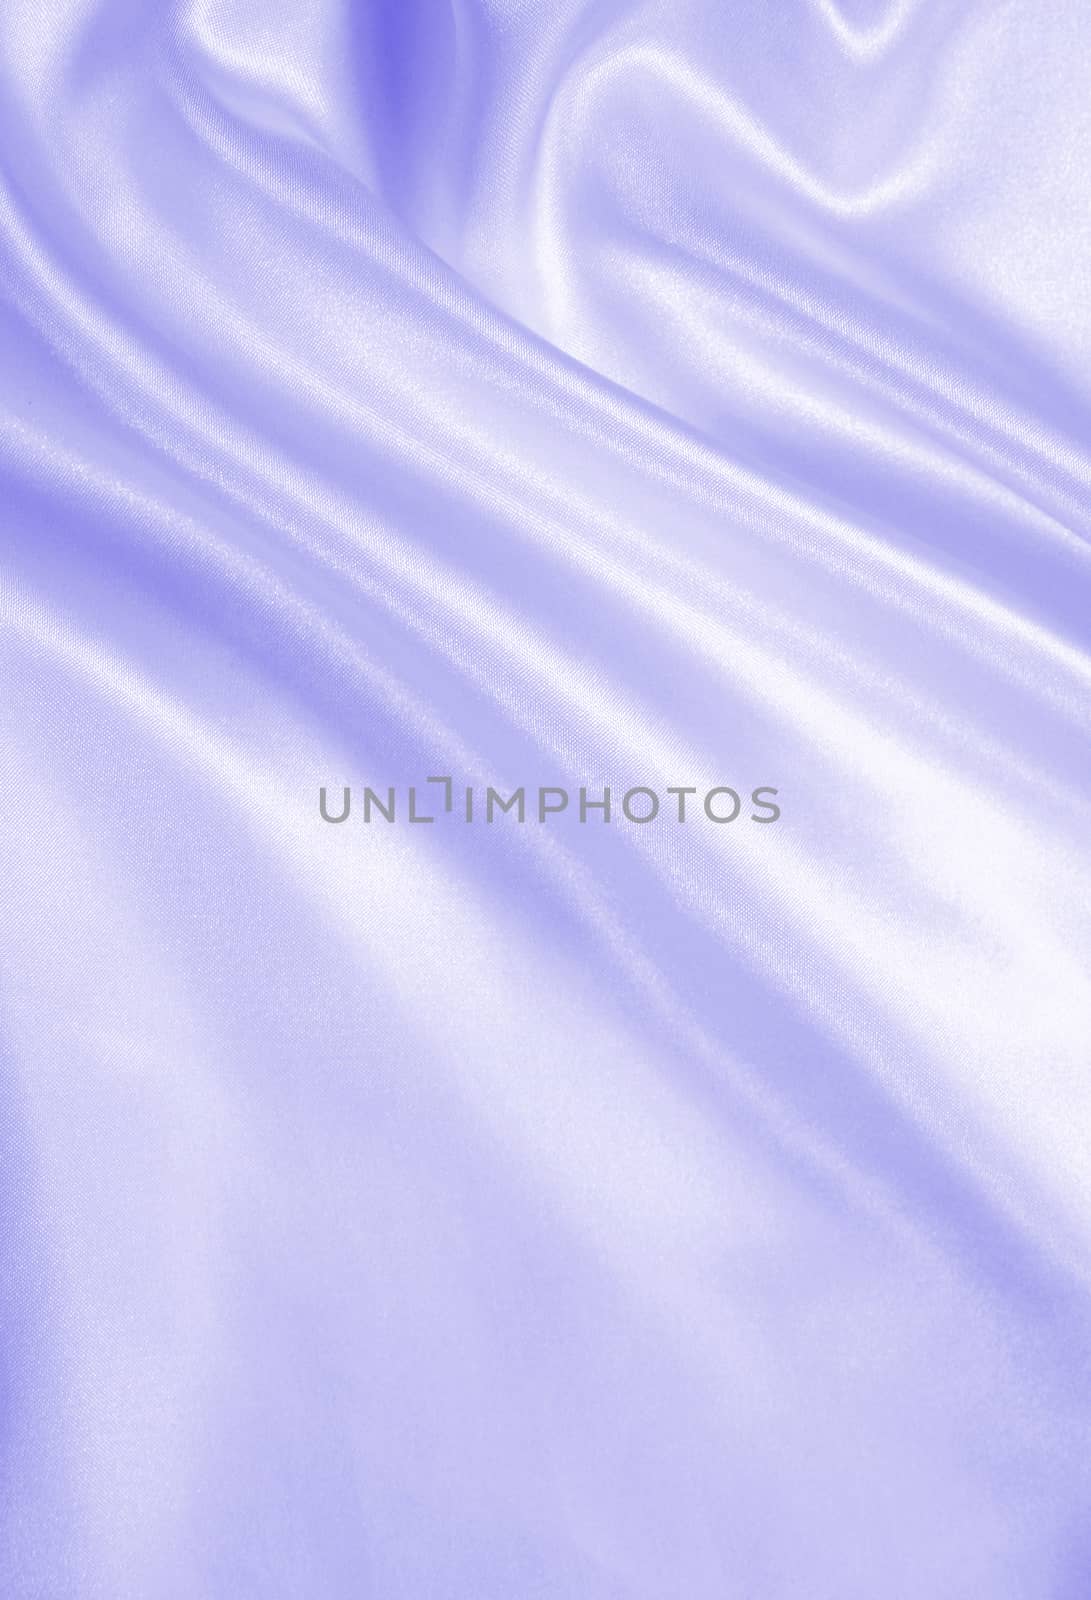 Smooth elegant lilac silk or satin as background  by oxanatravel